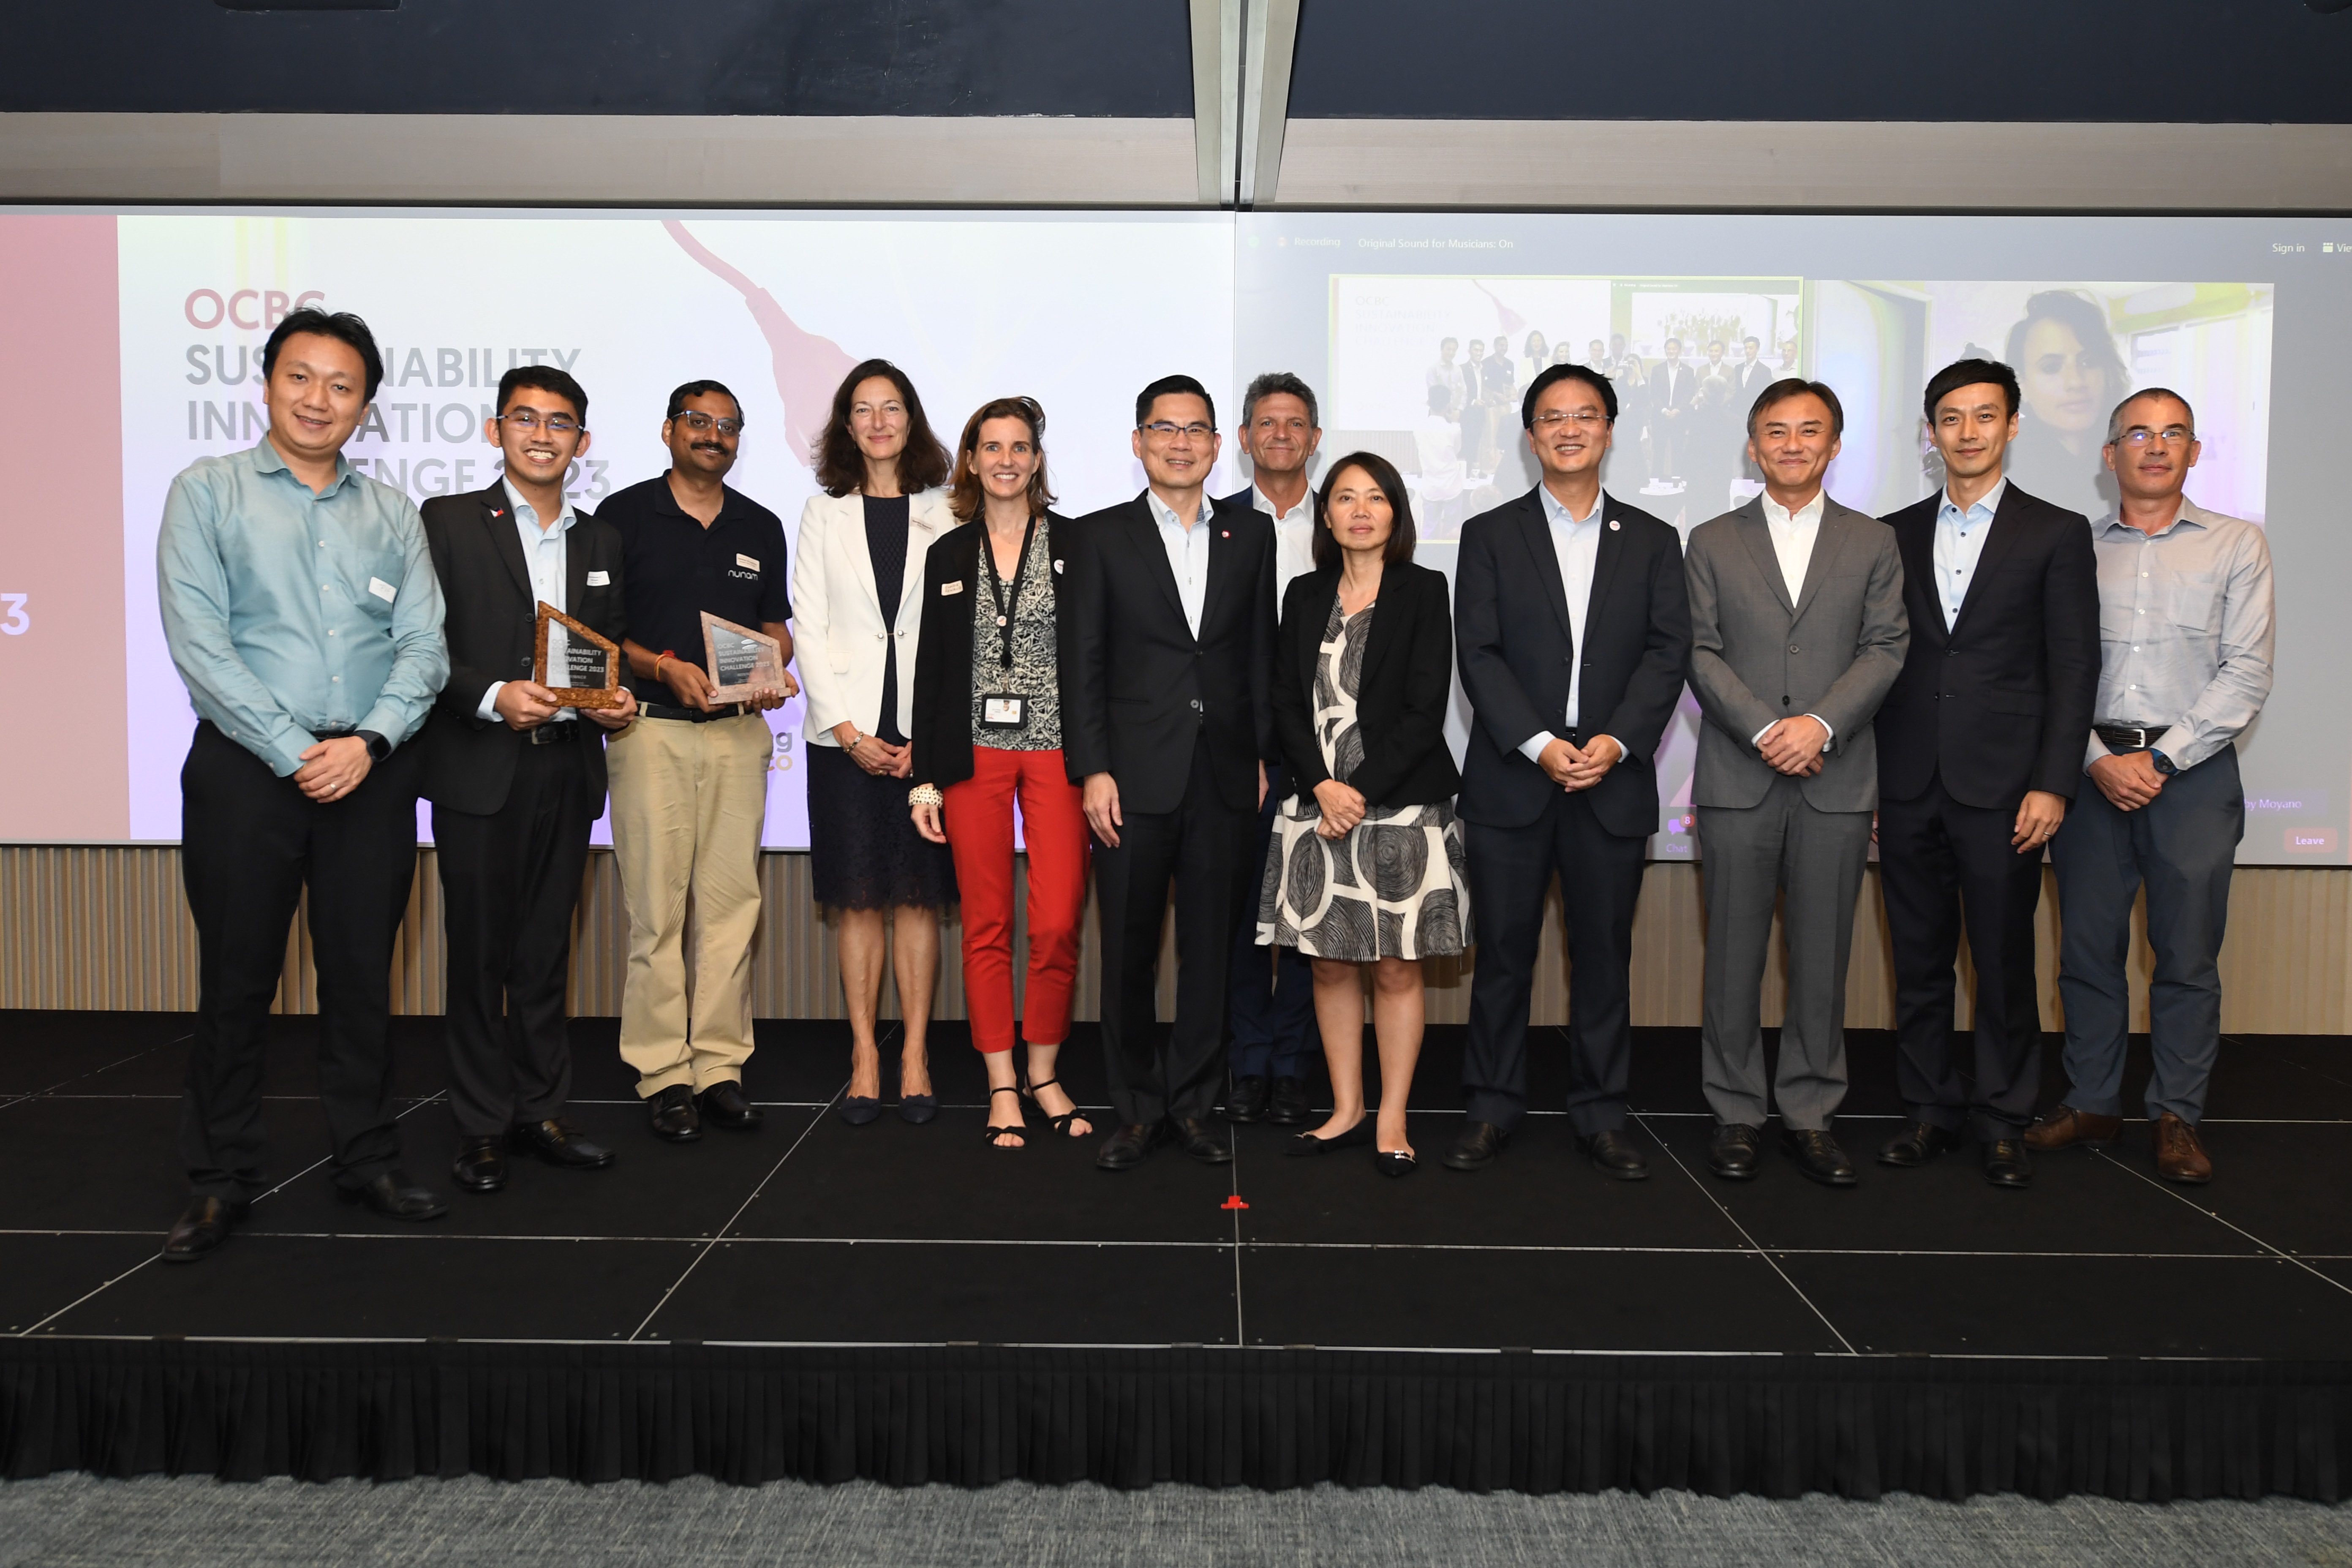 Winners of the OCBC Sustainability Innovation Challenge 2023 with Mr Steve KYAW, Head and Managing Director, Hutchinson Research and Innovation Singapore (first from left); Ms Elodie RENAUD, Managing Director, TotalEnergies Renewables Distributed Generation Asia (fifth from left); Mr Tan Teck Long, Head of Global Wholesale Banking, OCBC (sixth from left); Mr Franck Vitte, Managing Director, TotalEnergies Charging Services Singapore (seventh from left); Her Excellency Ms Minh-di Tang, the Ambassador of France to Singapore (eighth from left); Mr Ting Wee LIANG, Country Chair Singapore and President, TotalEnergies Asia-Pacific & Middle East Marketing & Services (ninth from left) and Mr Mike Ng, Group Chief Sustainability Officer, OCBC (tenth from left)